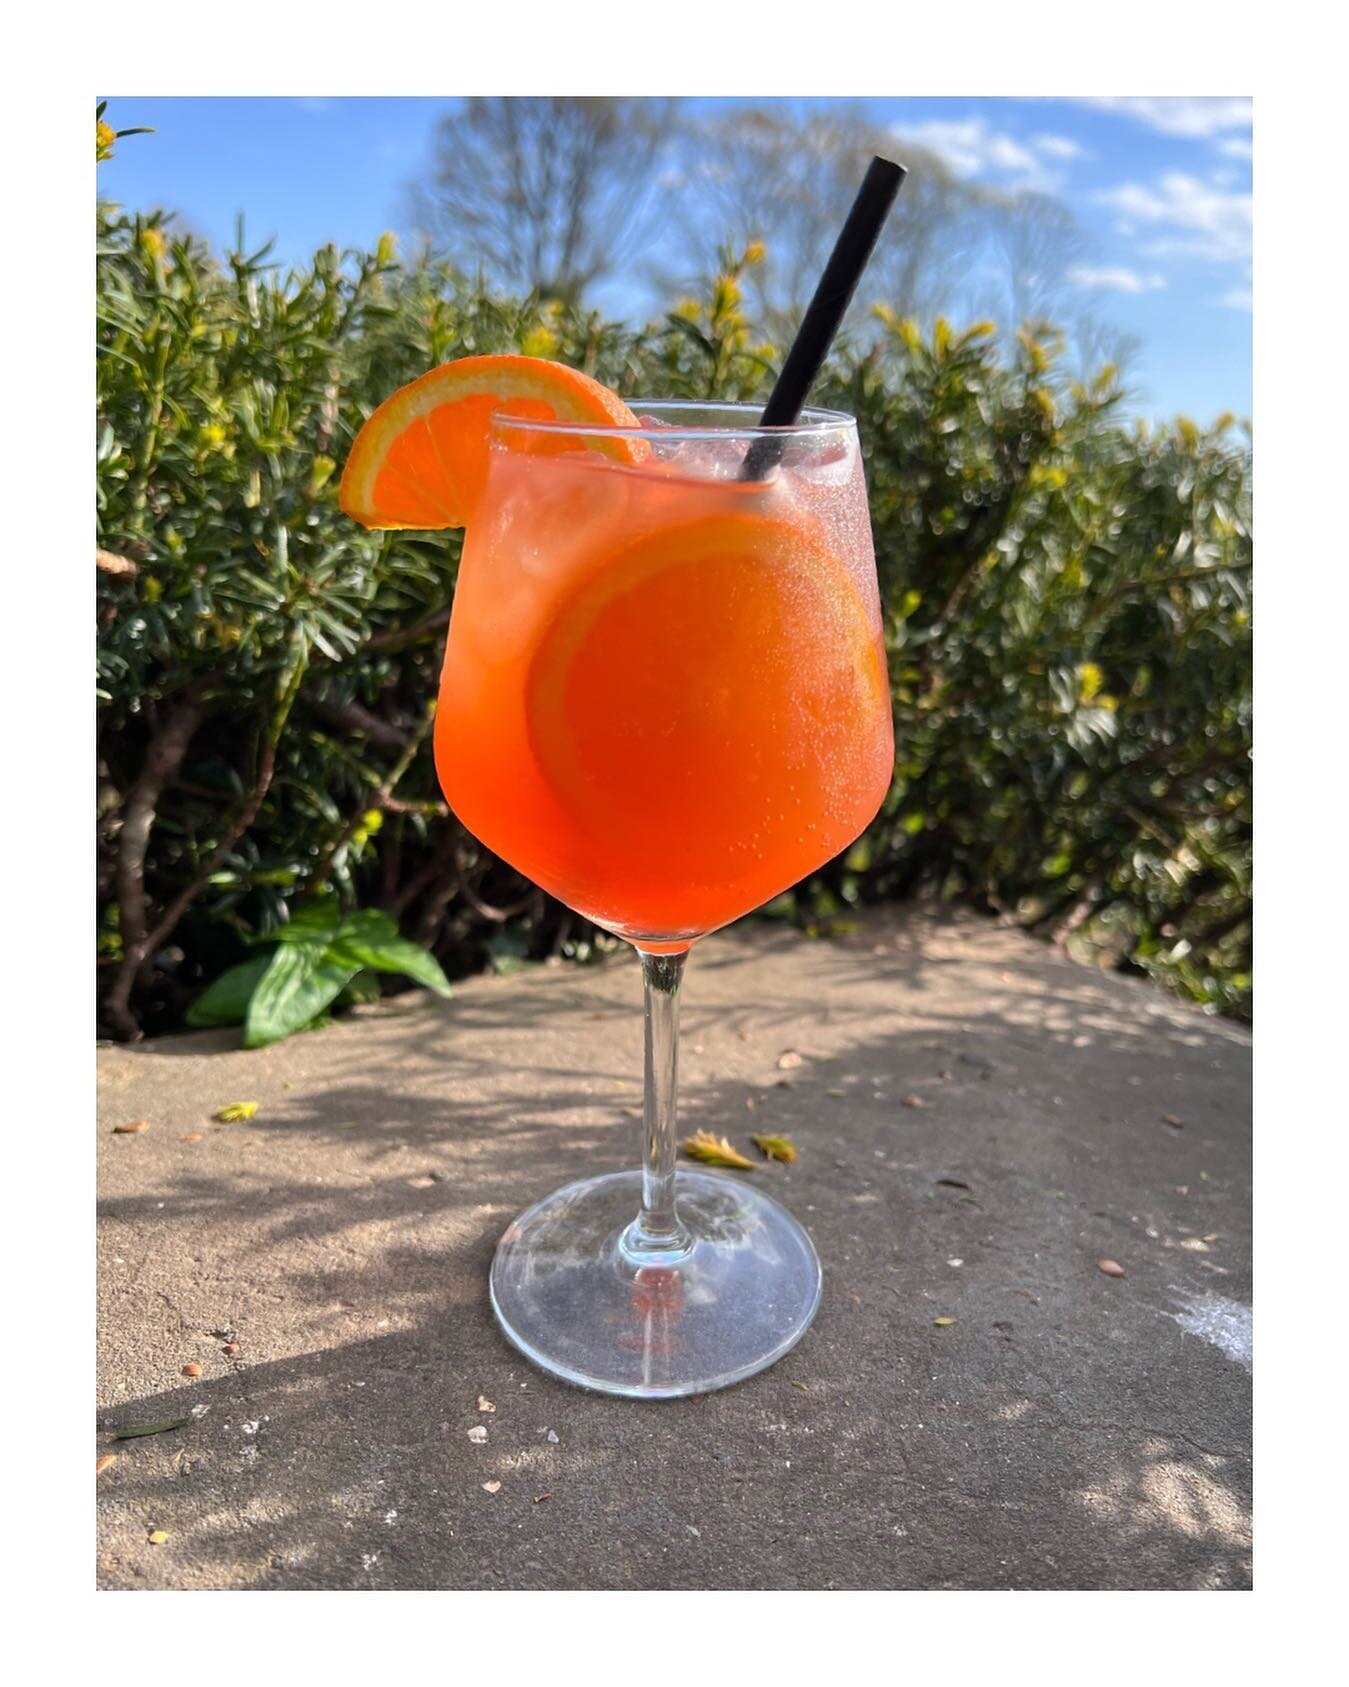 Tonight @suspiciouslyelvis is on at @brightonopenairtheatre and we have some fab pre party drinks lined up for you! 

Treat yourself to a delicious Aperol Spritz, G&amp;T or an ice cold pint of Amstel. 
Enjoy on the terrace or have it to take away! 
